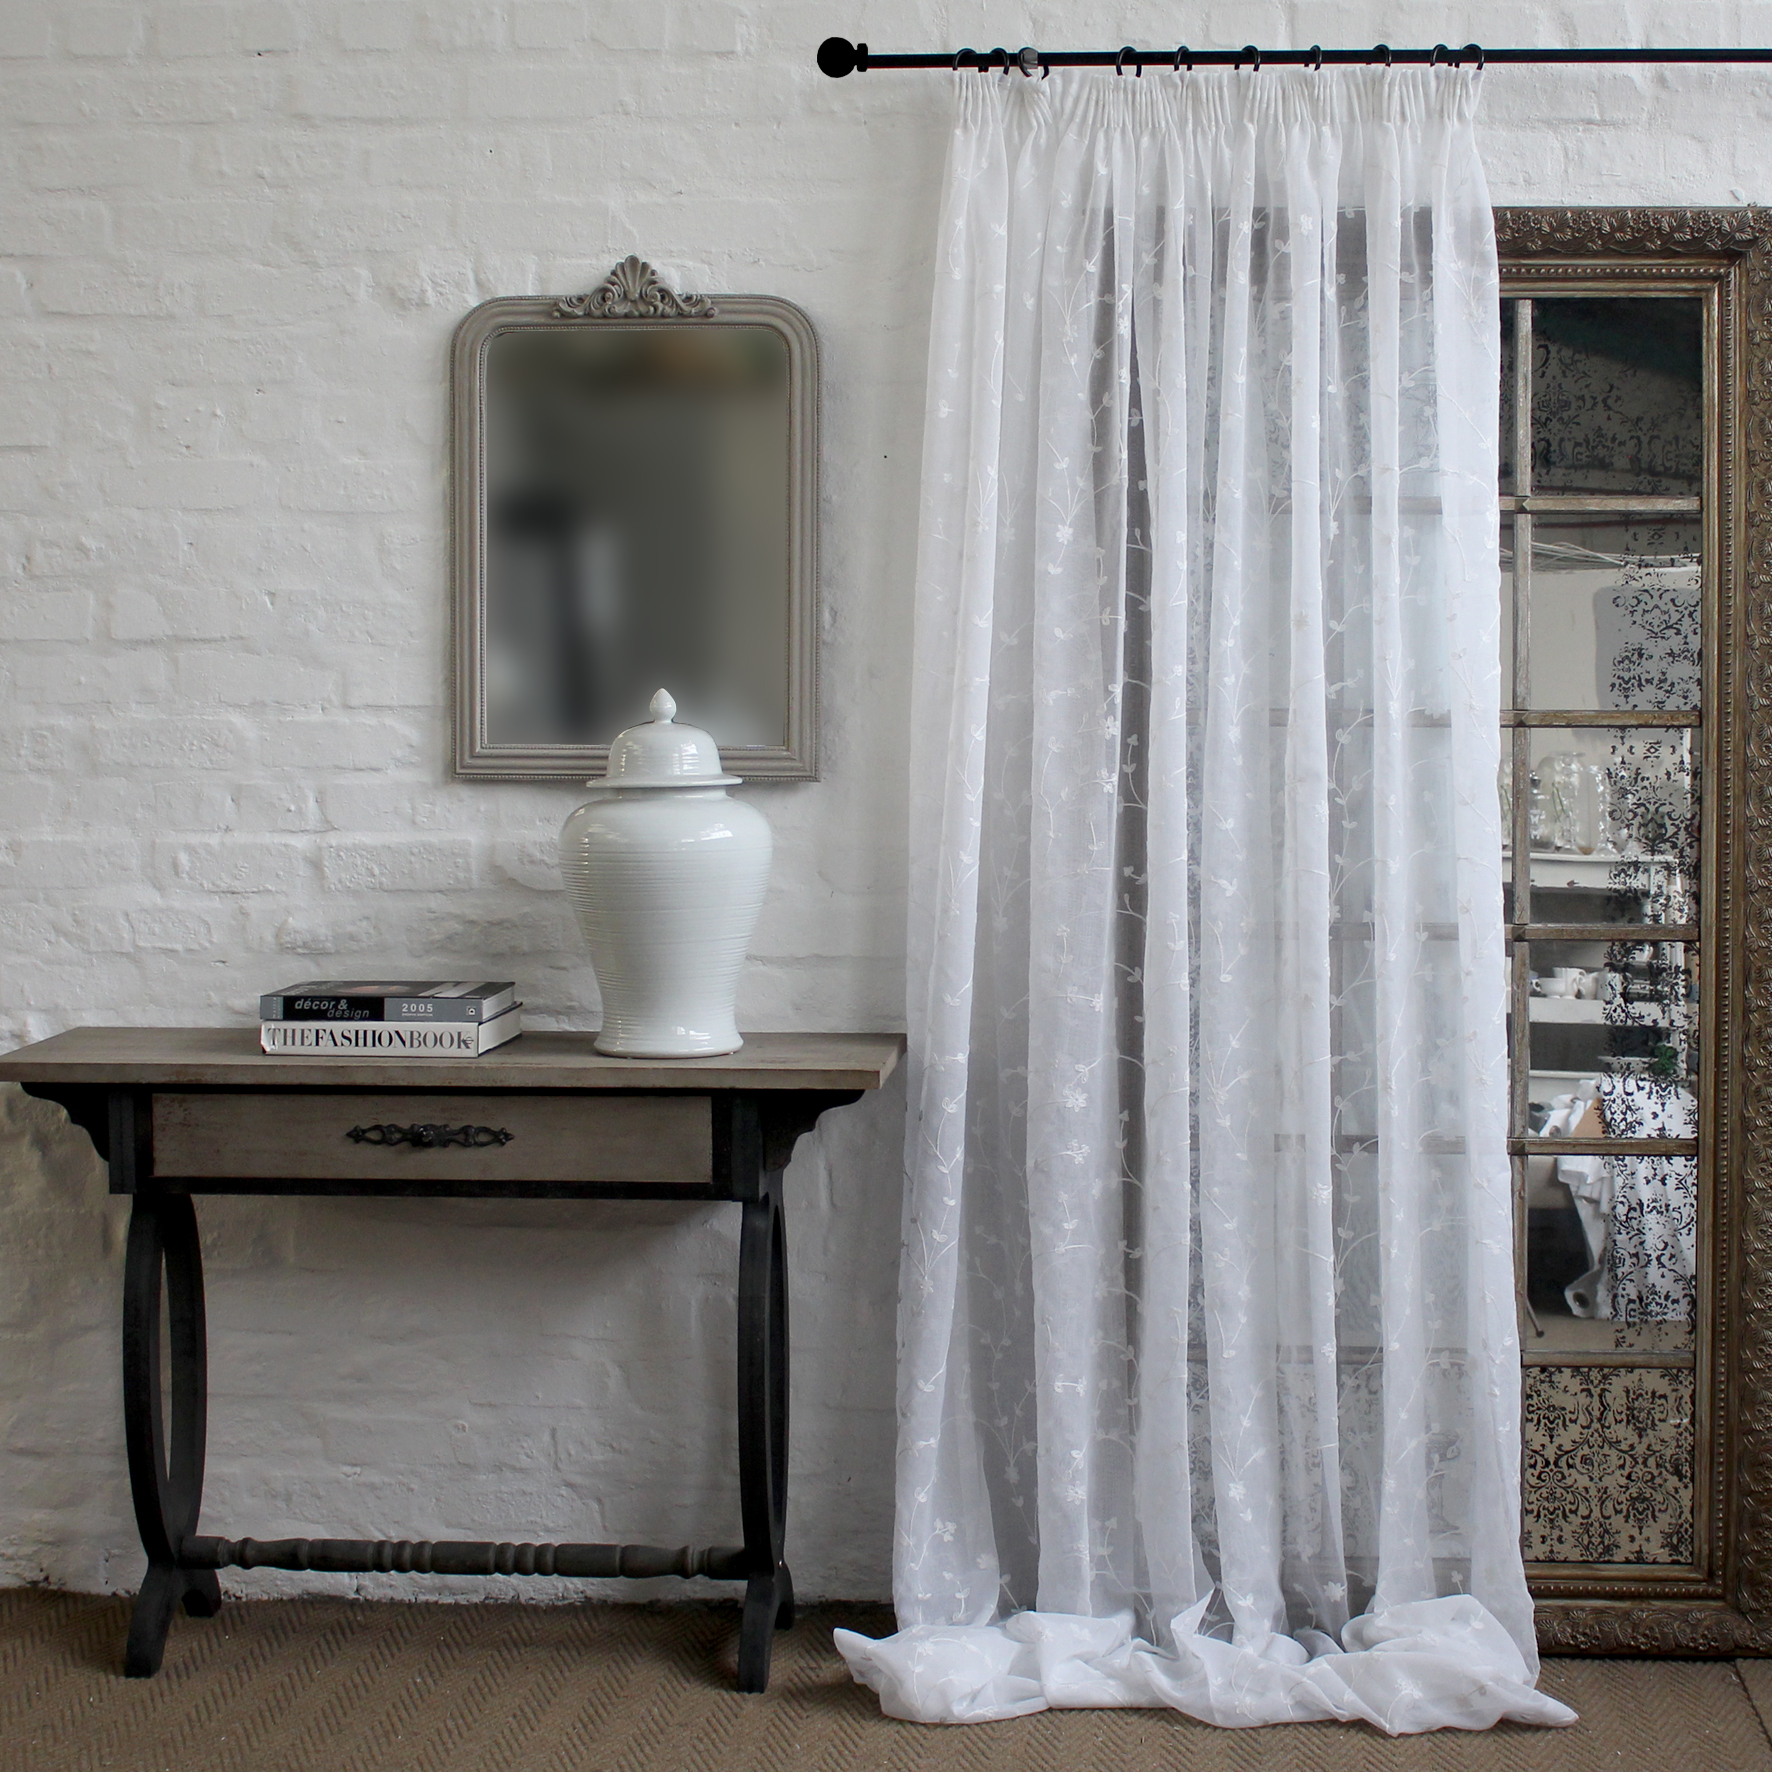 Daisy Chain Voile White Curtain/TAPED